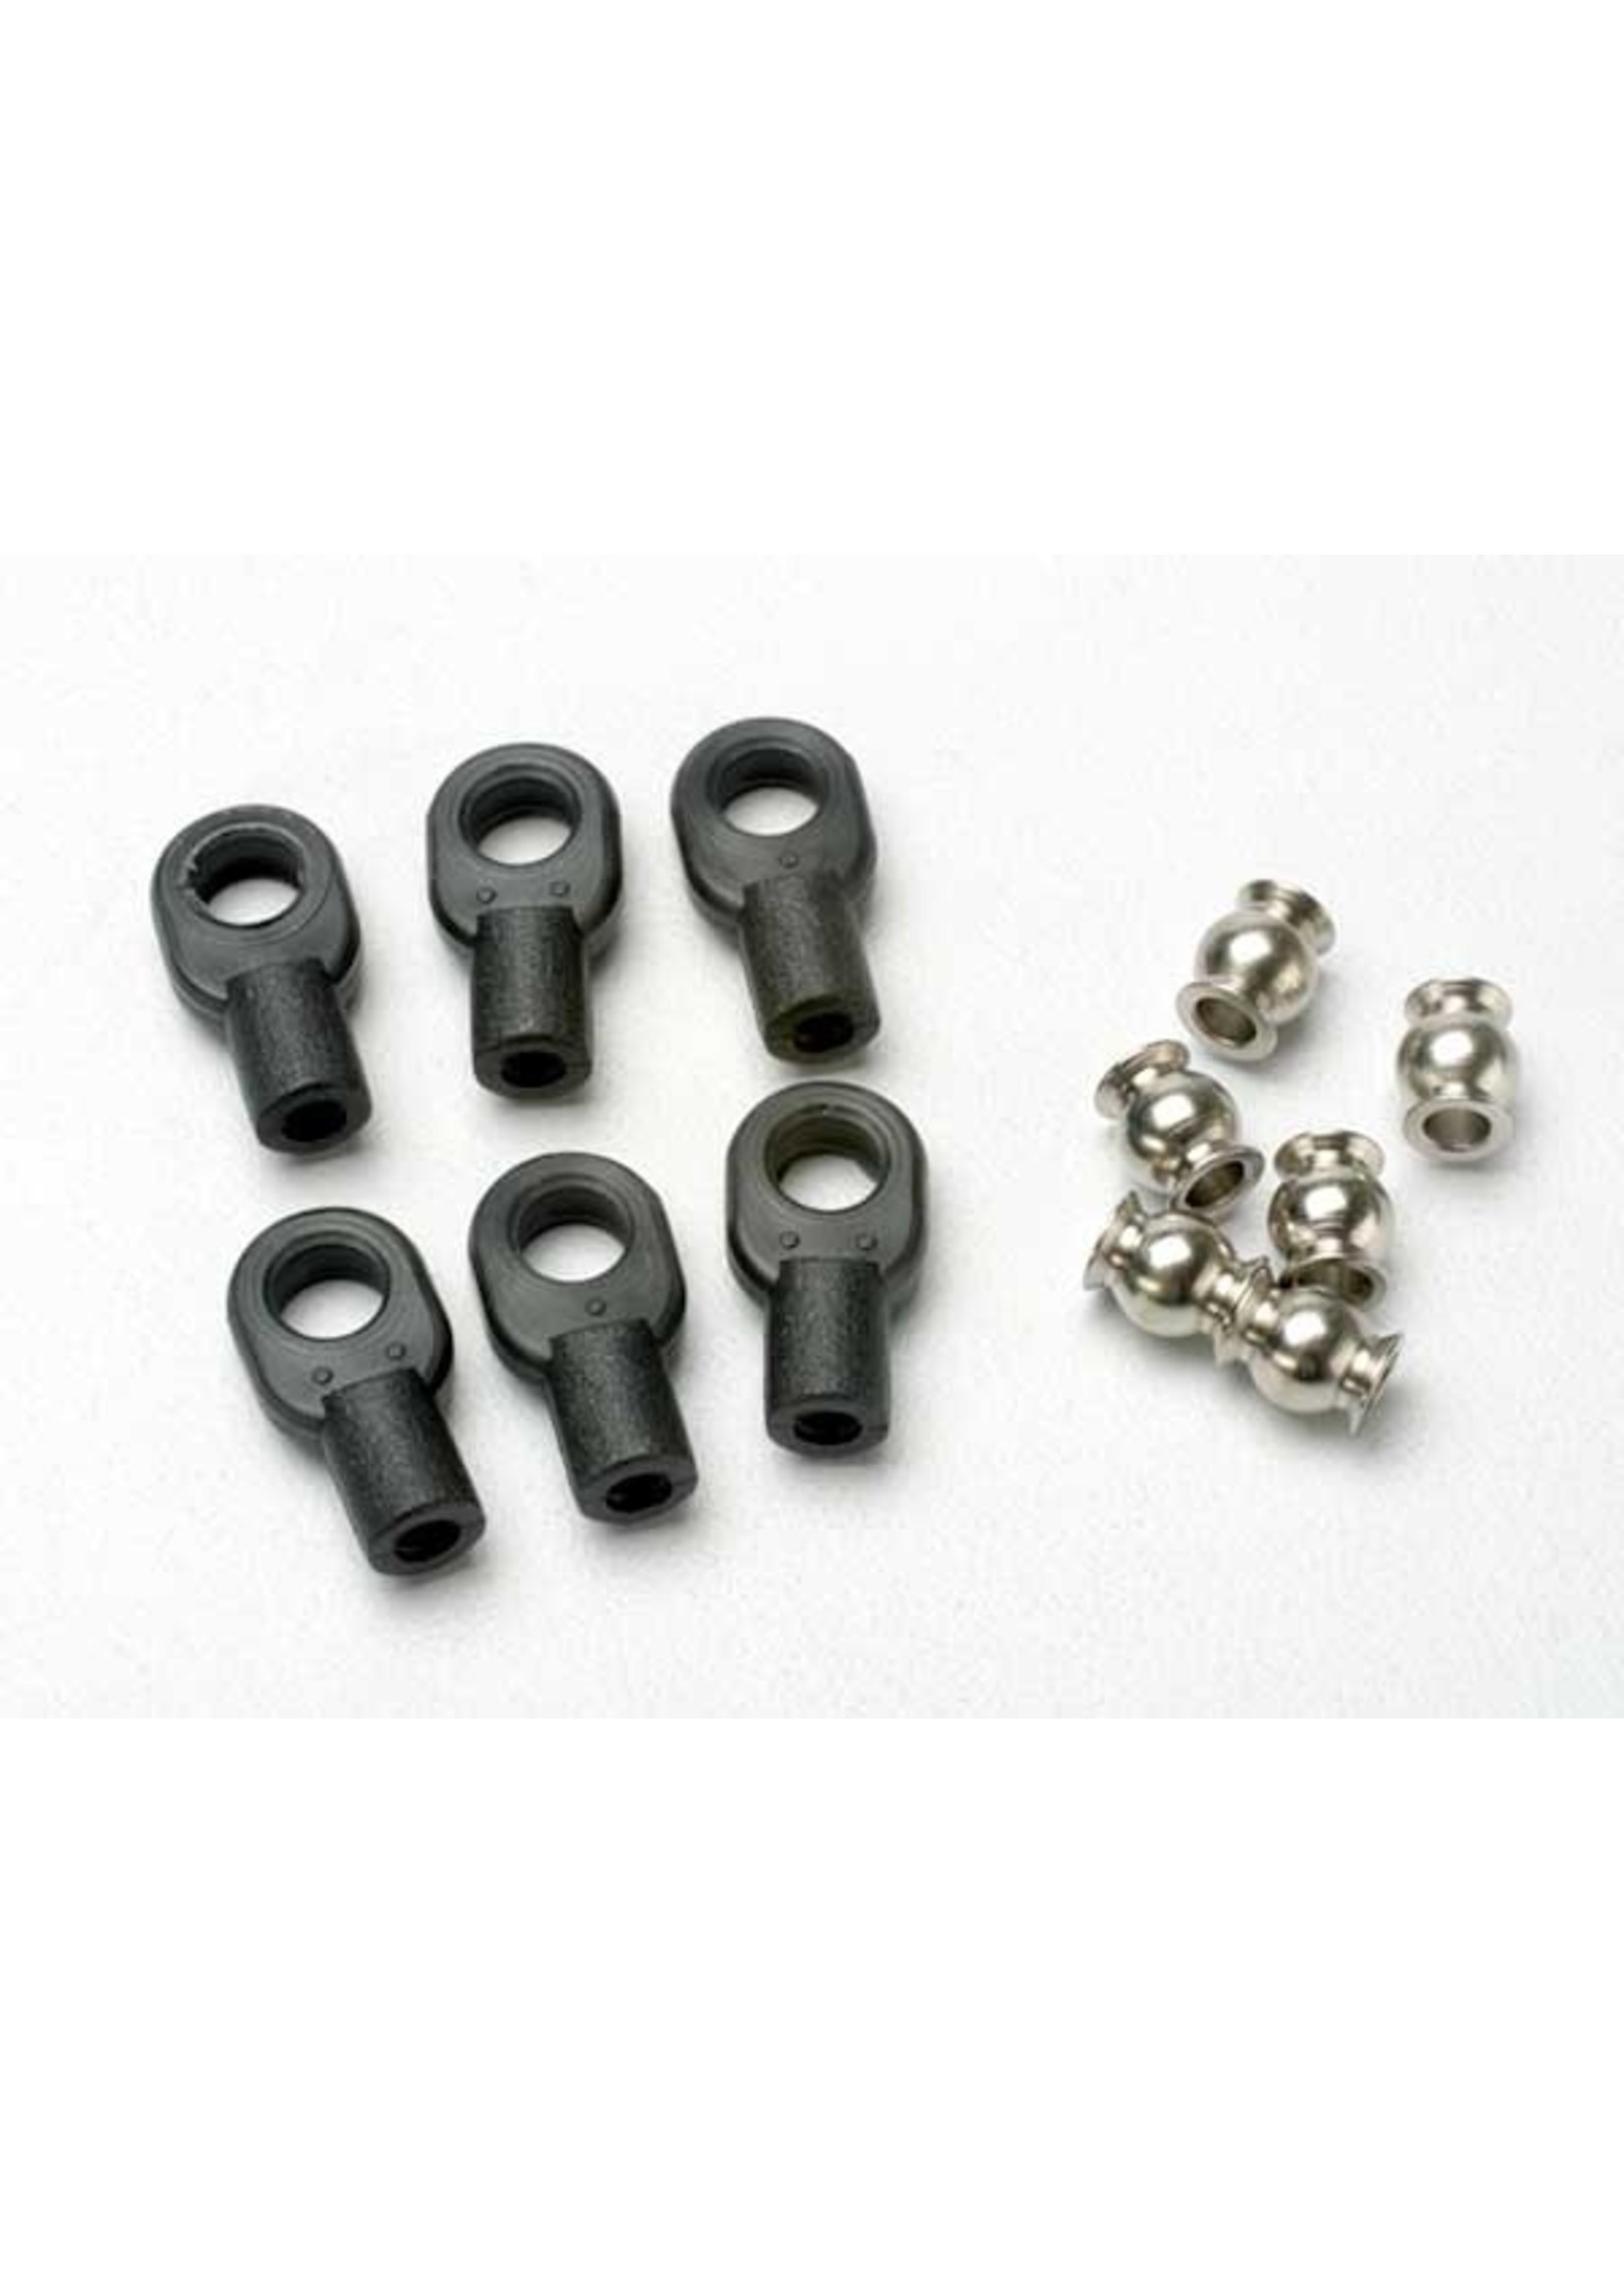 Traxxas 5349 - Small Rod Ends with Hollow Balls